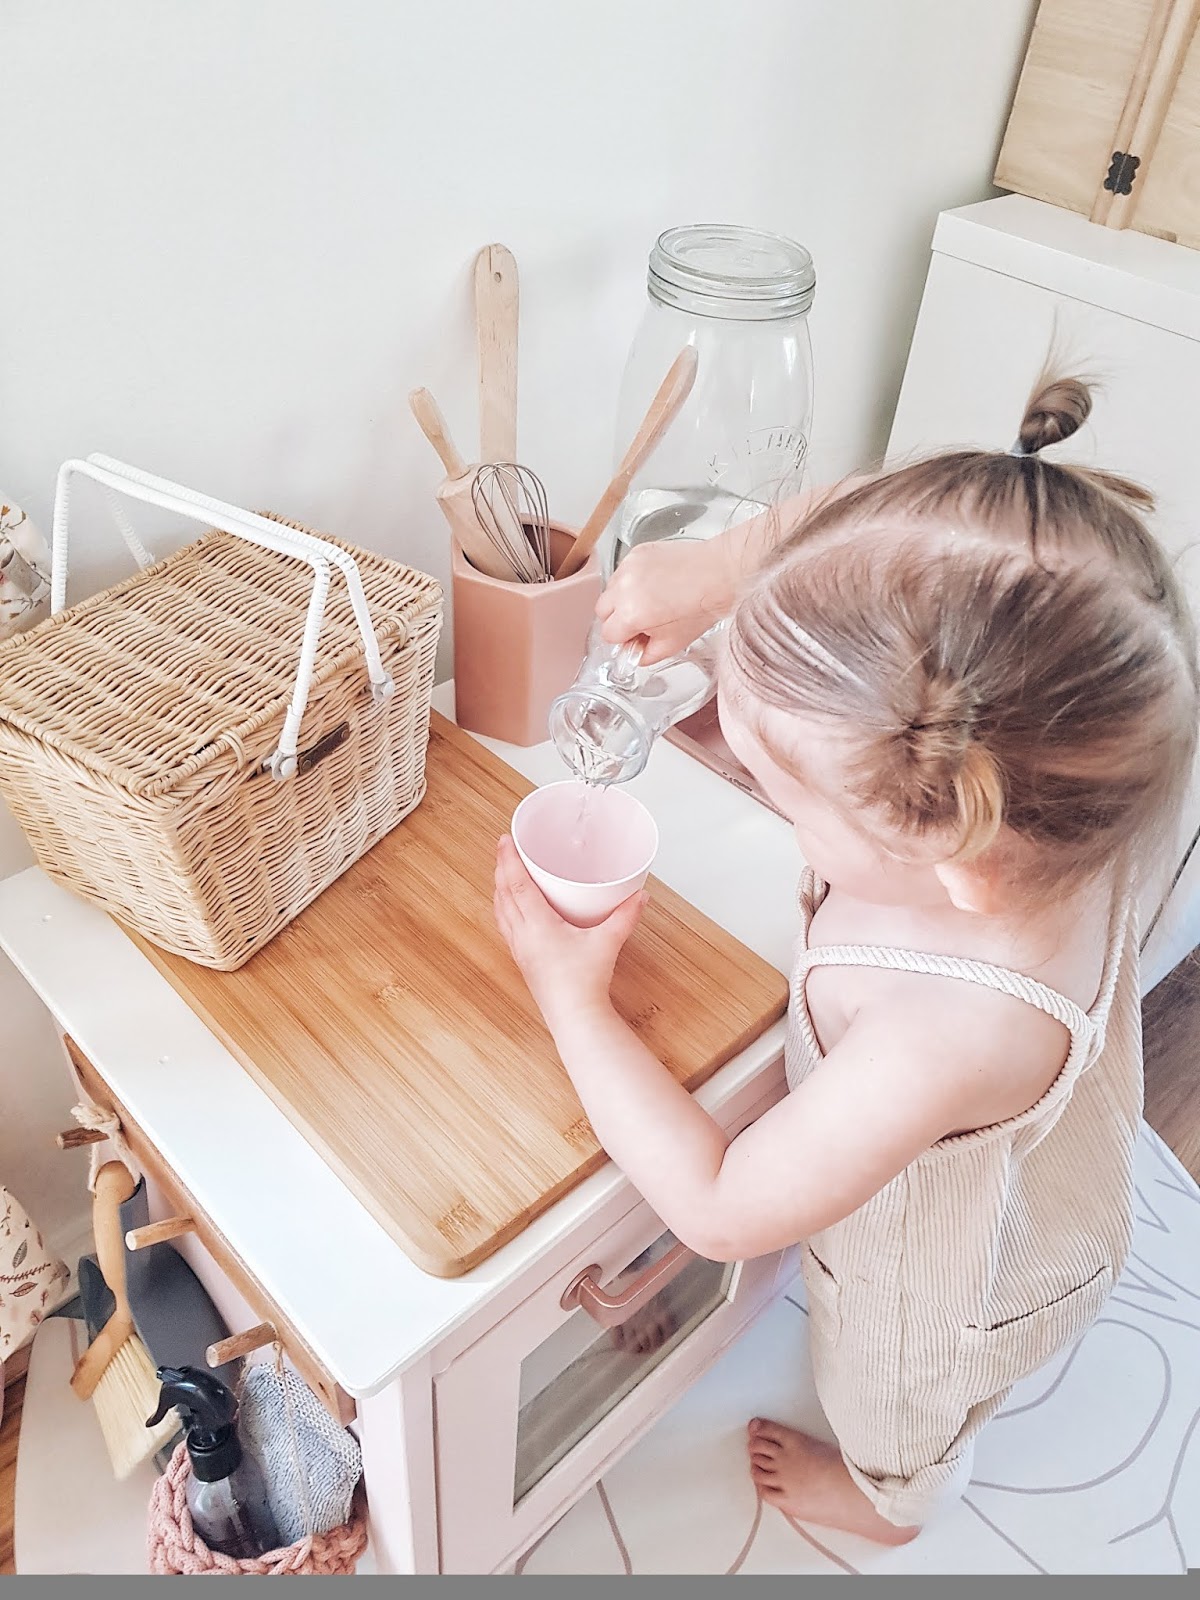 DIY: A Montessori Toddler Kitchen Makeover, IKEA HACK — Whirlybobble :  Parenting & Lifestyle Blog